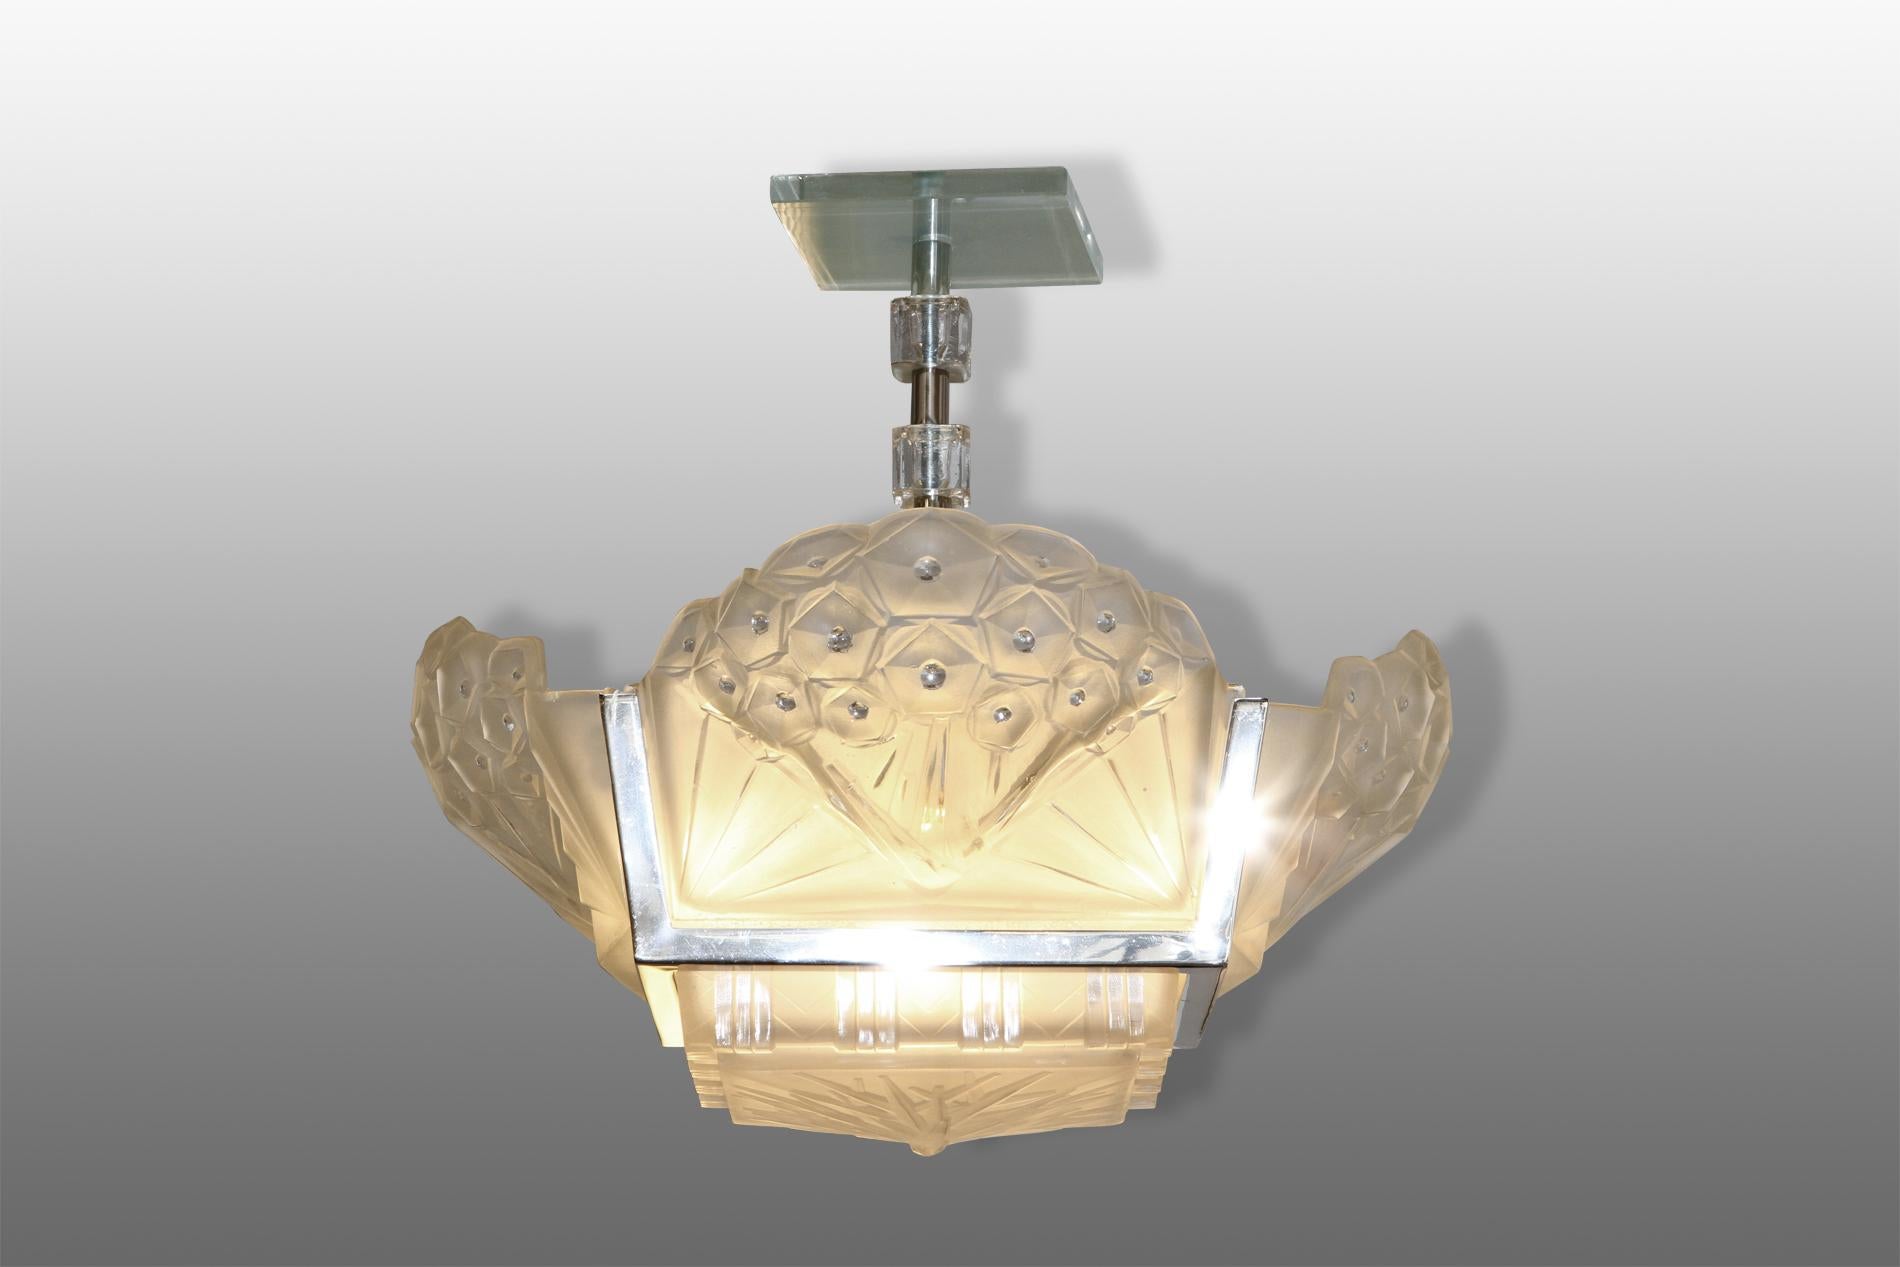 French Art Deco ceiling light by Muller Frères Luneville original from 1930 in all glass and nickeled bronze. The specificity of it is the design of the structure and the glass that open like a flower. Sculptural and really elegant in every space. 